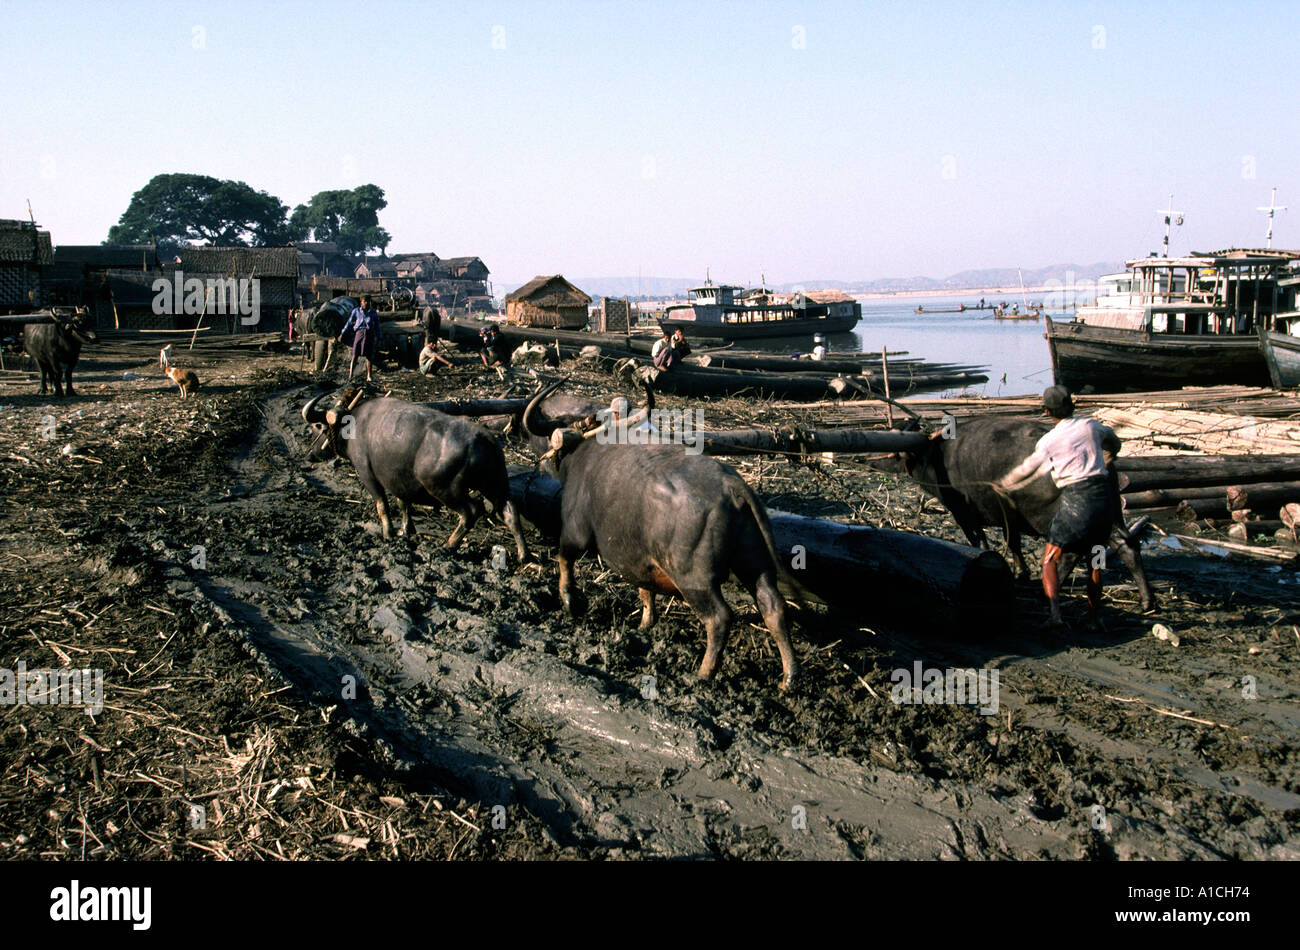 Myanmar Burma Mandalay forestry Buffalo Point teak being pulled from the River Ayeyarwady Irrawaddy to be taken to sawmills Stock Photo